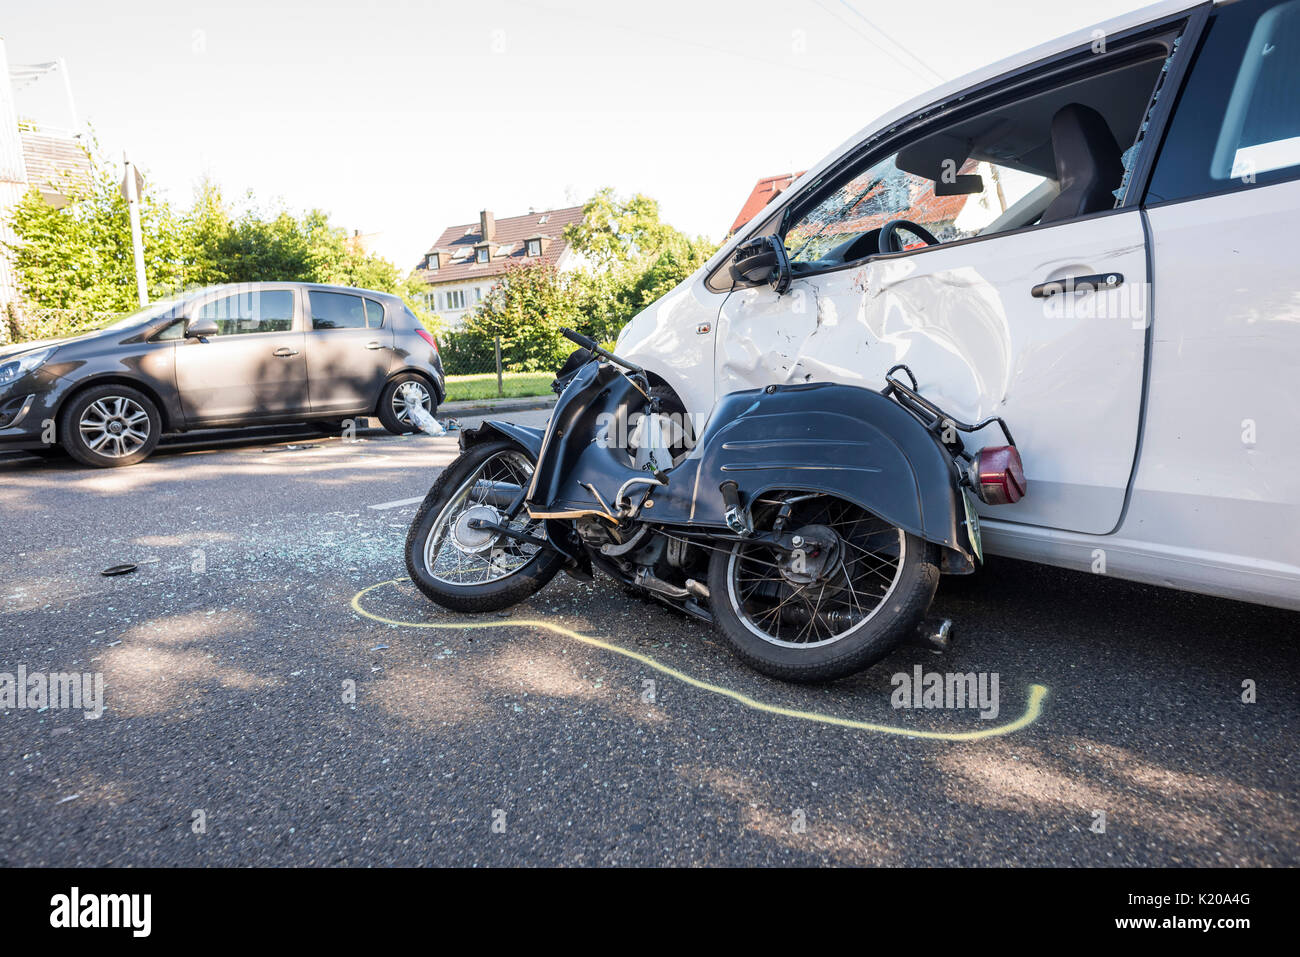 Heavy road accident, Simson scooter crashing in car, police recording accident, Germany Stock Photo